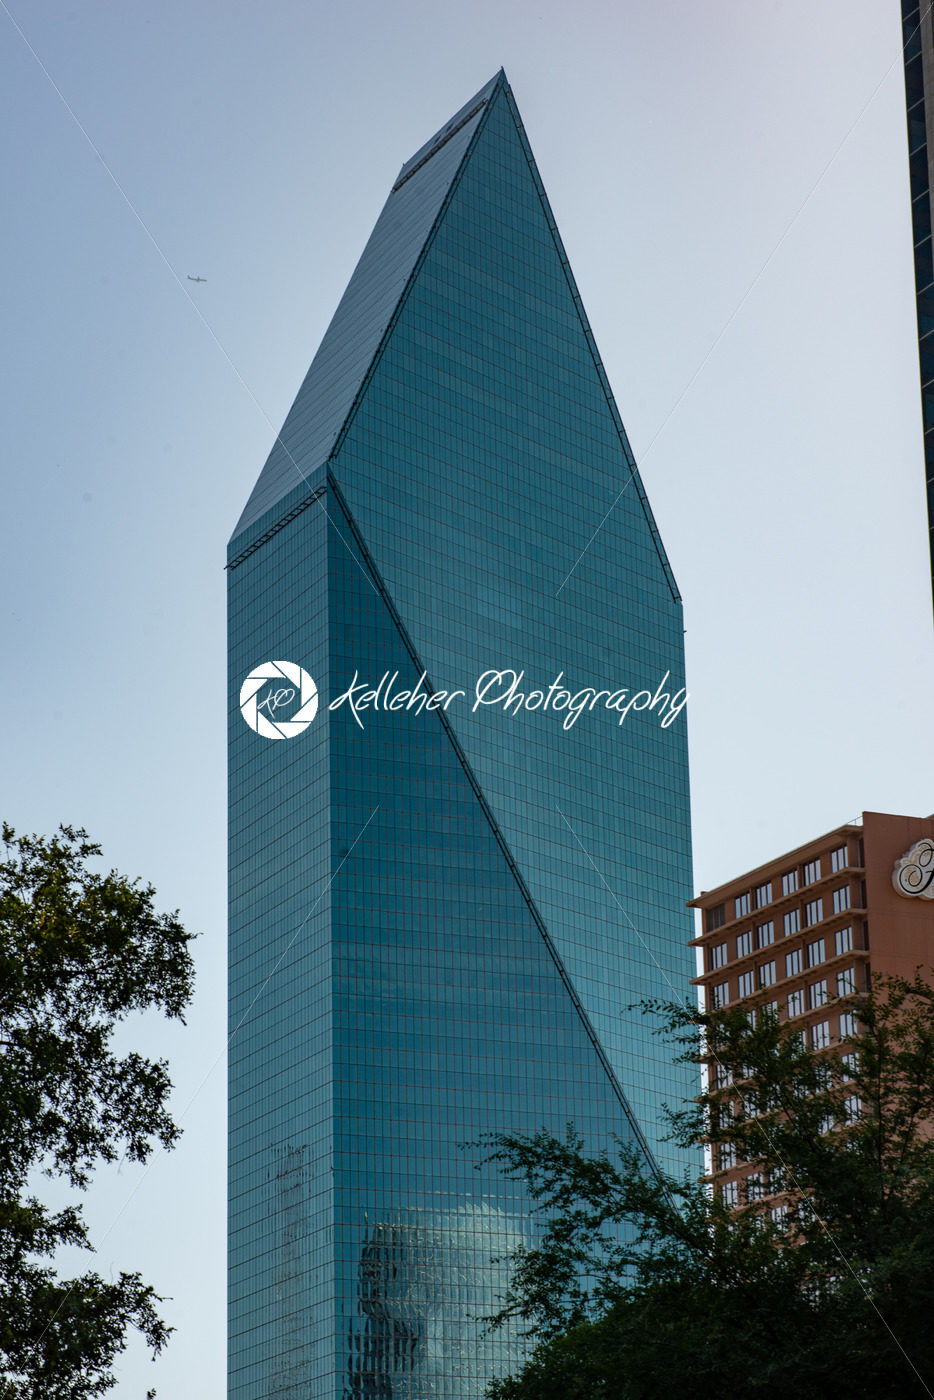 Dallas, Texas – May 7, 2018: Fountain Place in Dallas, Texas against blue sky - Kelleher Photography Store